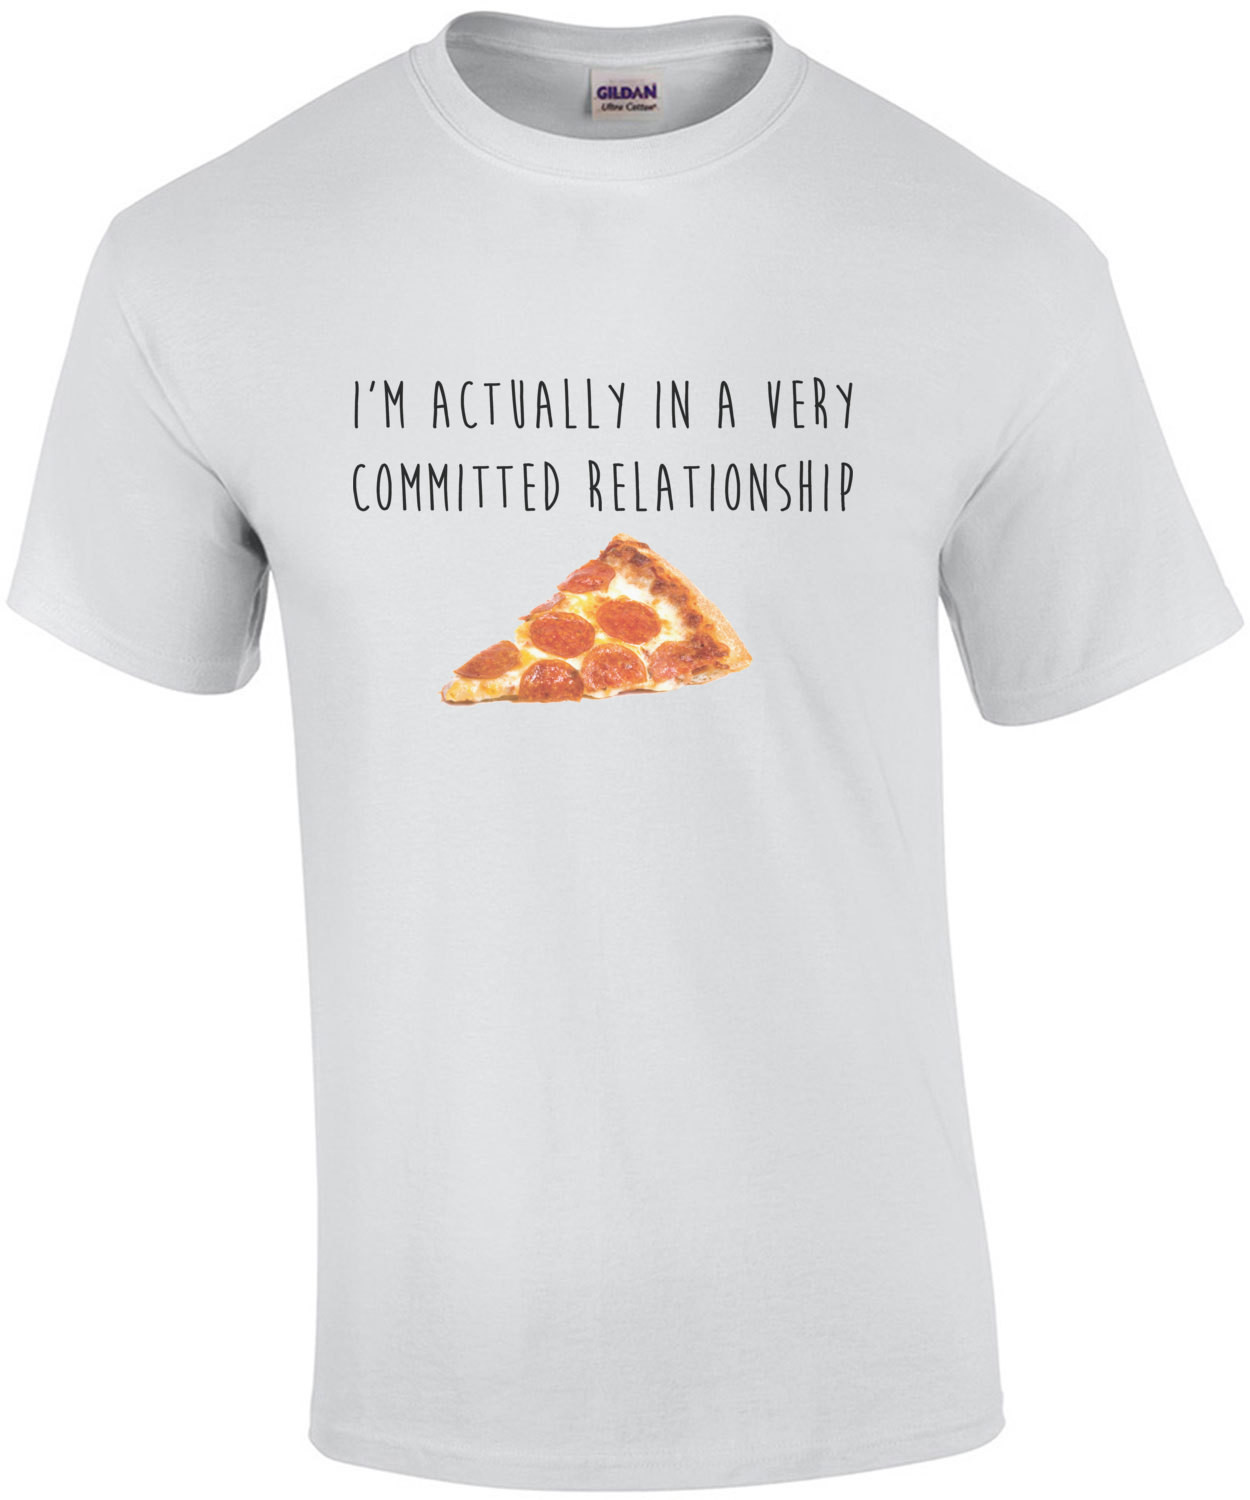 I'm actually in a very committed relationship - pizza t-shirt